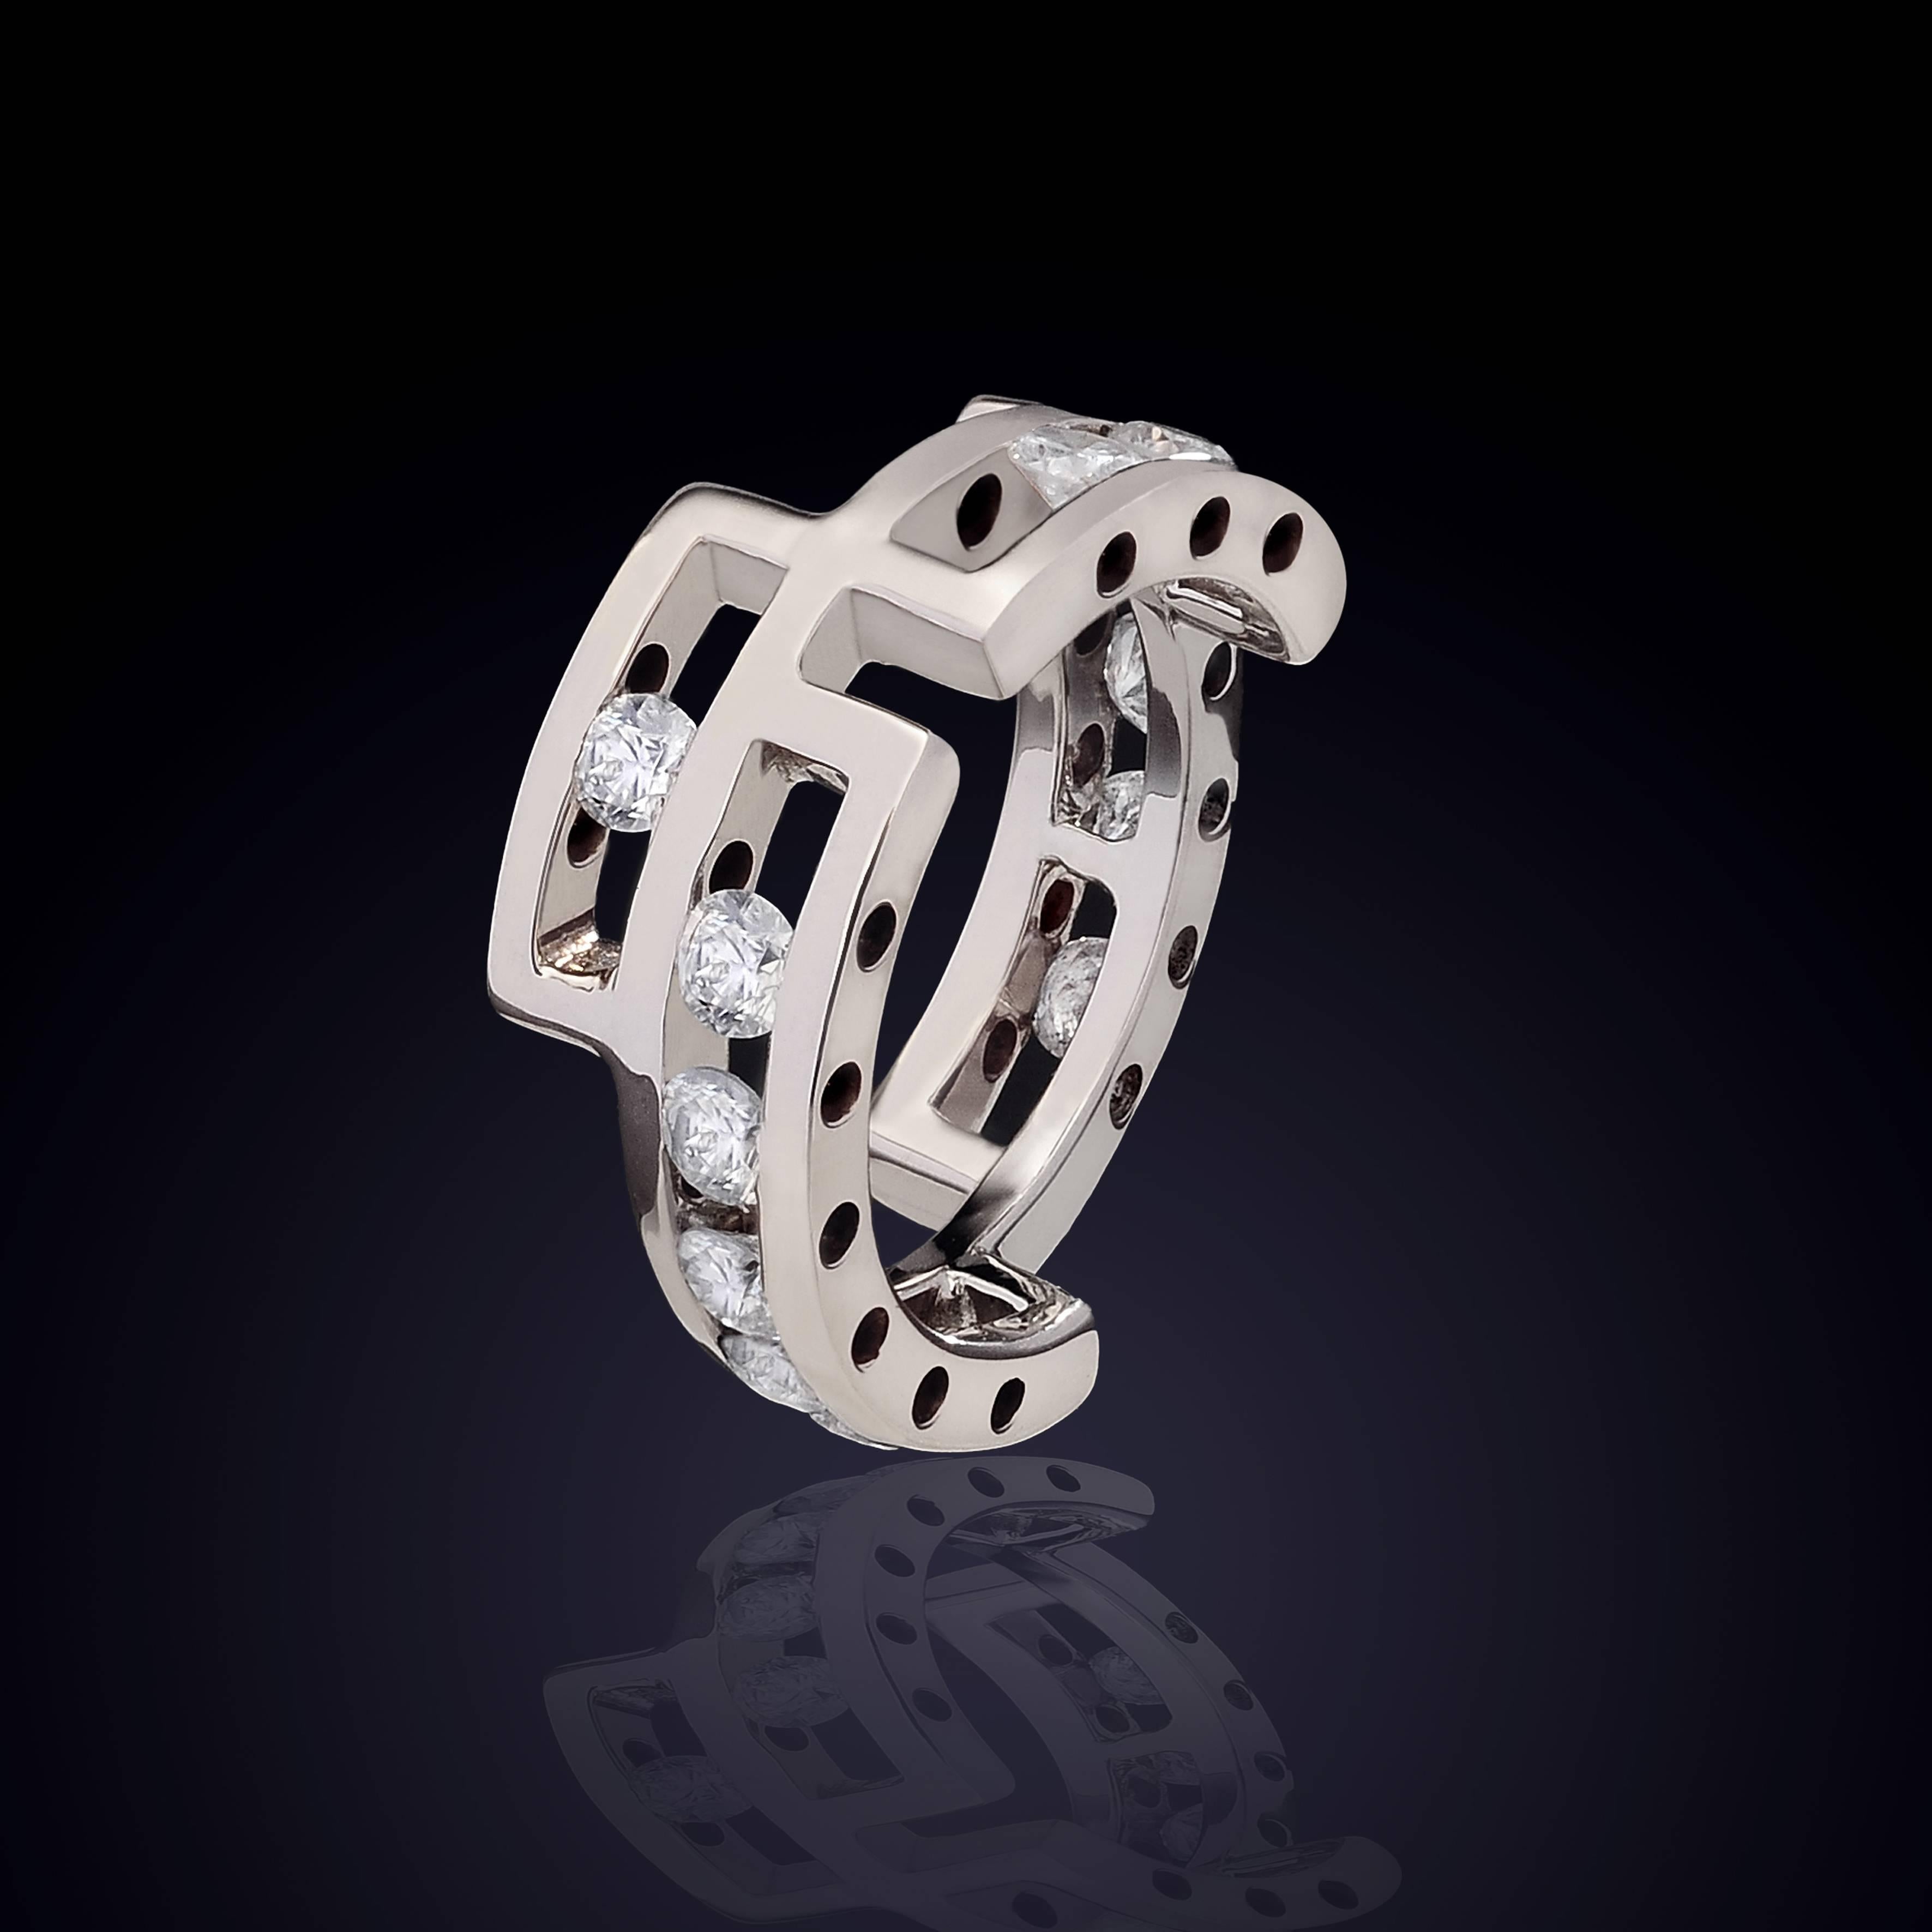 White 18 kt Gold Ring with Ice Diamonds 1.20 Carat. US Size 6.5. 

This distinctive ring is aimed at a sporty and dynamic spirit, designed to create the feeling of movement, as the project name suggests. It is made up of linear elements assembled